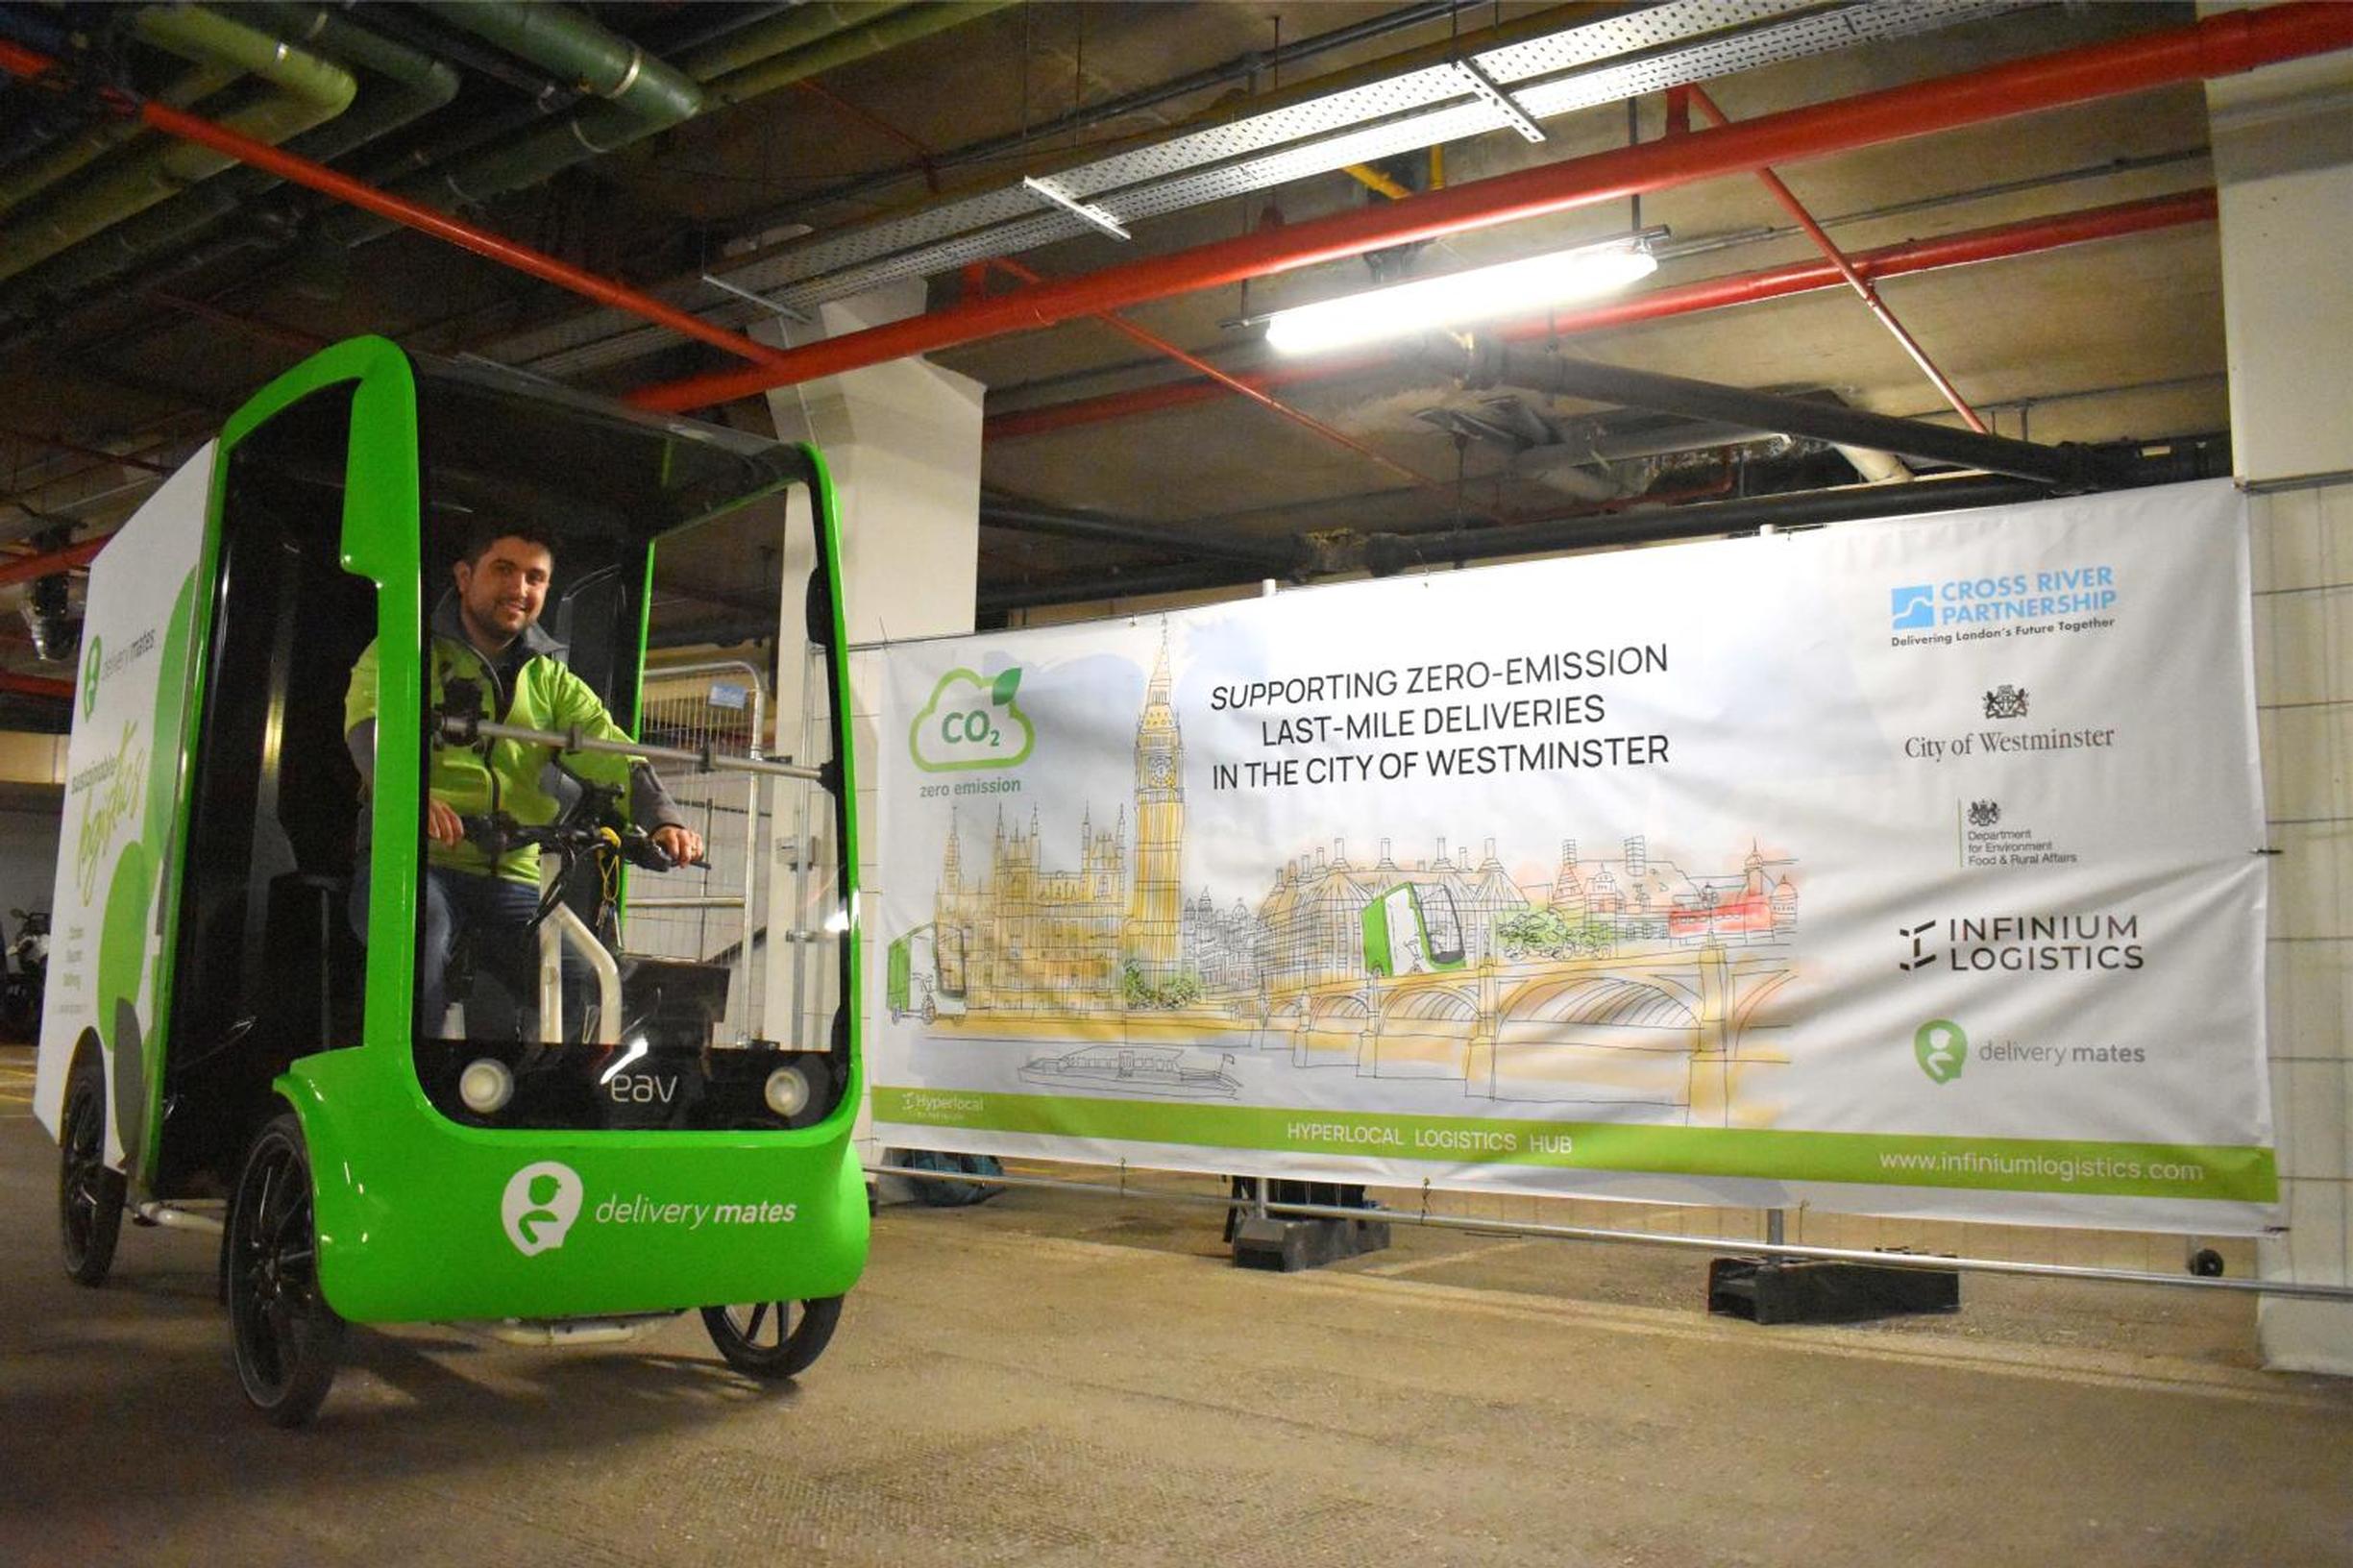 The Pimlico micro-logistics hub will receive parcels from an electric delivery vehicle and then distribute them by electric cargo bikes